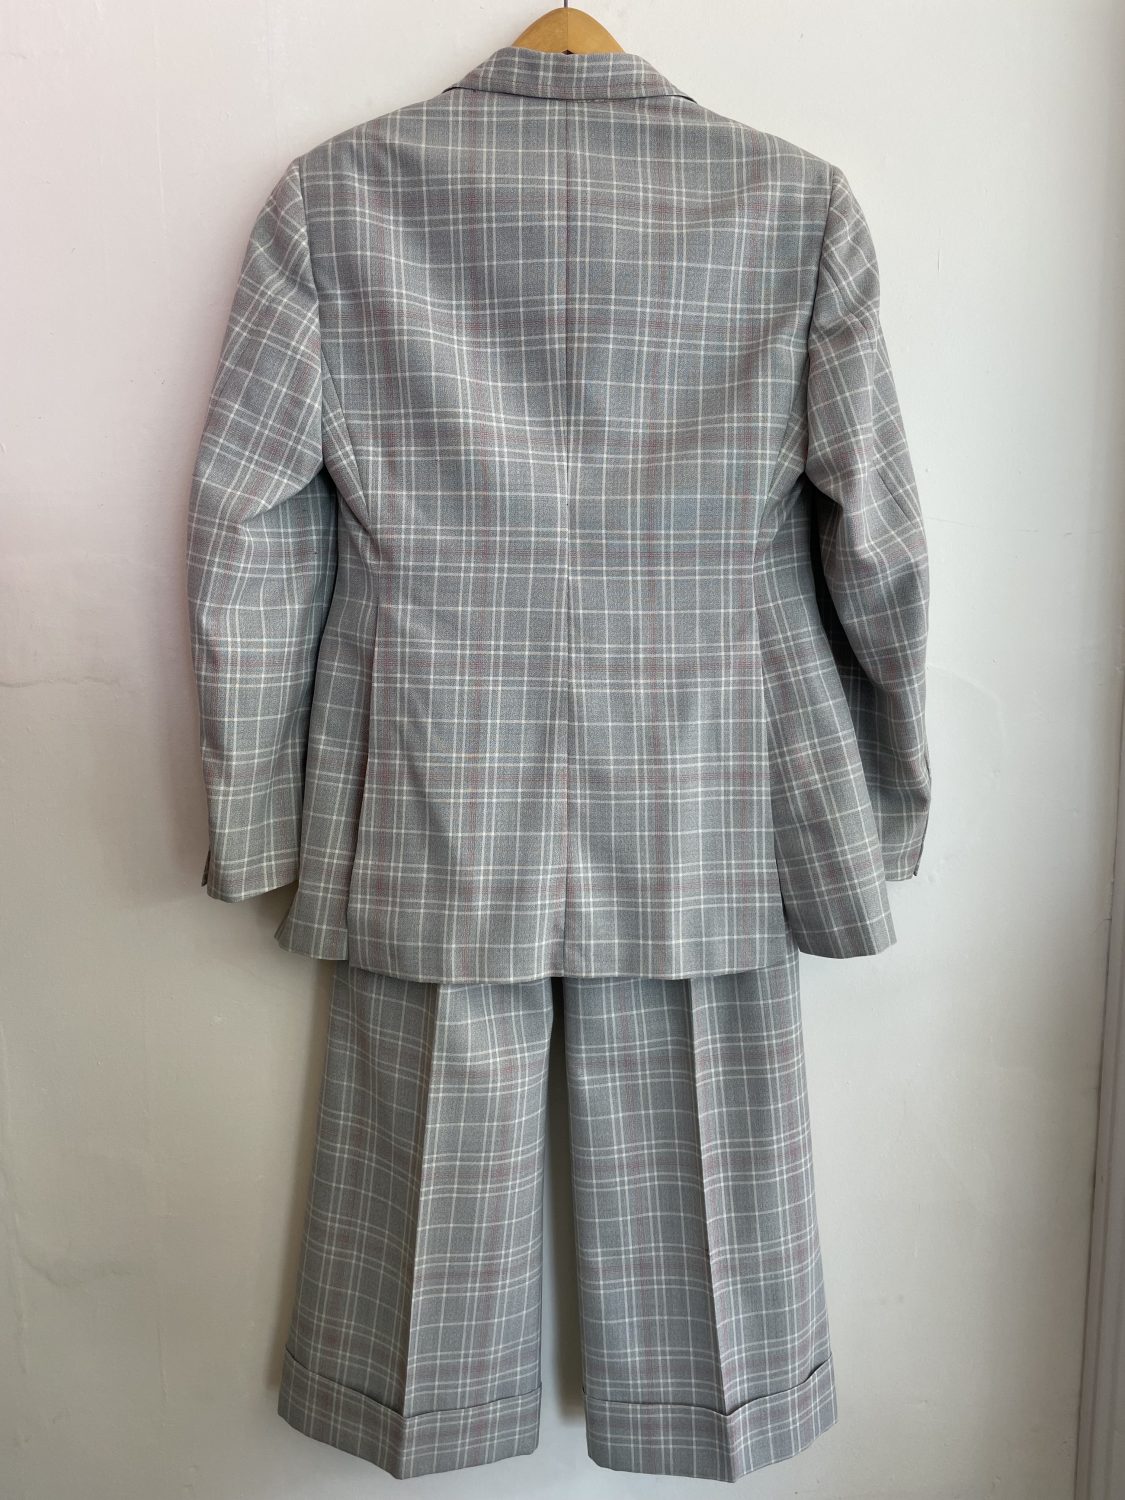 HAND-TAILORED 70's CHECKERED GREY 'KENTISH' 2PC MENS SUIT | Chaos ...